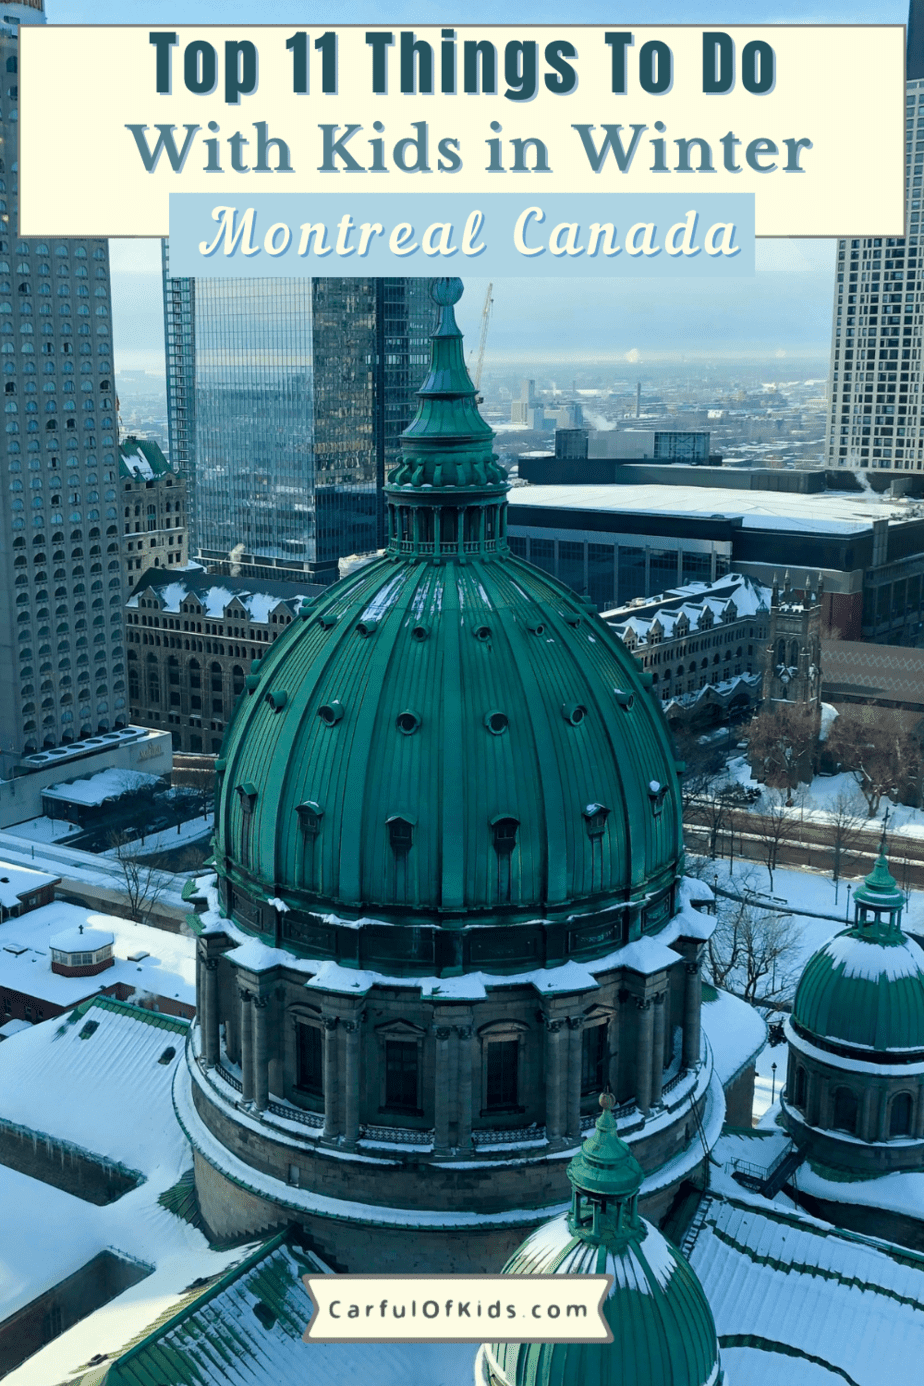 Spend a perfect winter day in Montreal during the winter with kids. Start with breakfast at a bakery in Montreal. Go to an outdoor ice rink or find a sled hill. Or spend the day in one of Montreal's museums. Follow up with a cup of tea and end the day at one of Montreal's winter festivals. Top Things to do with kids in Montreal in the winter #Montreal #Canada 